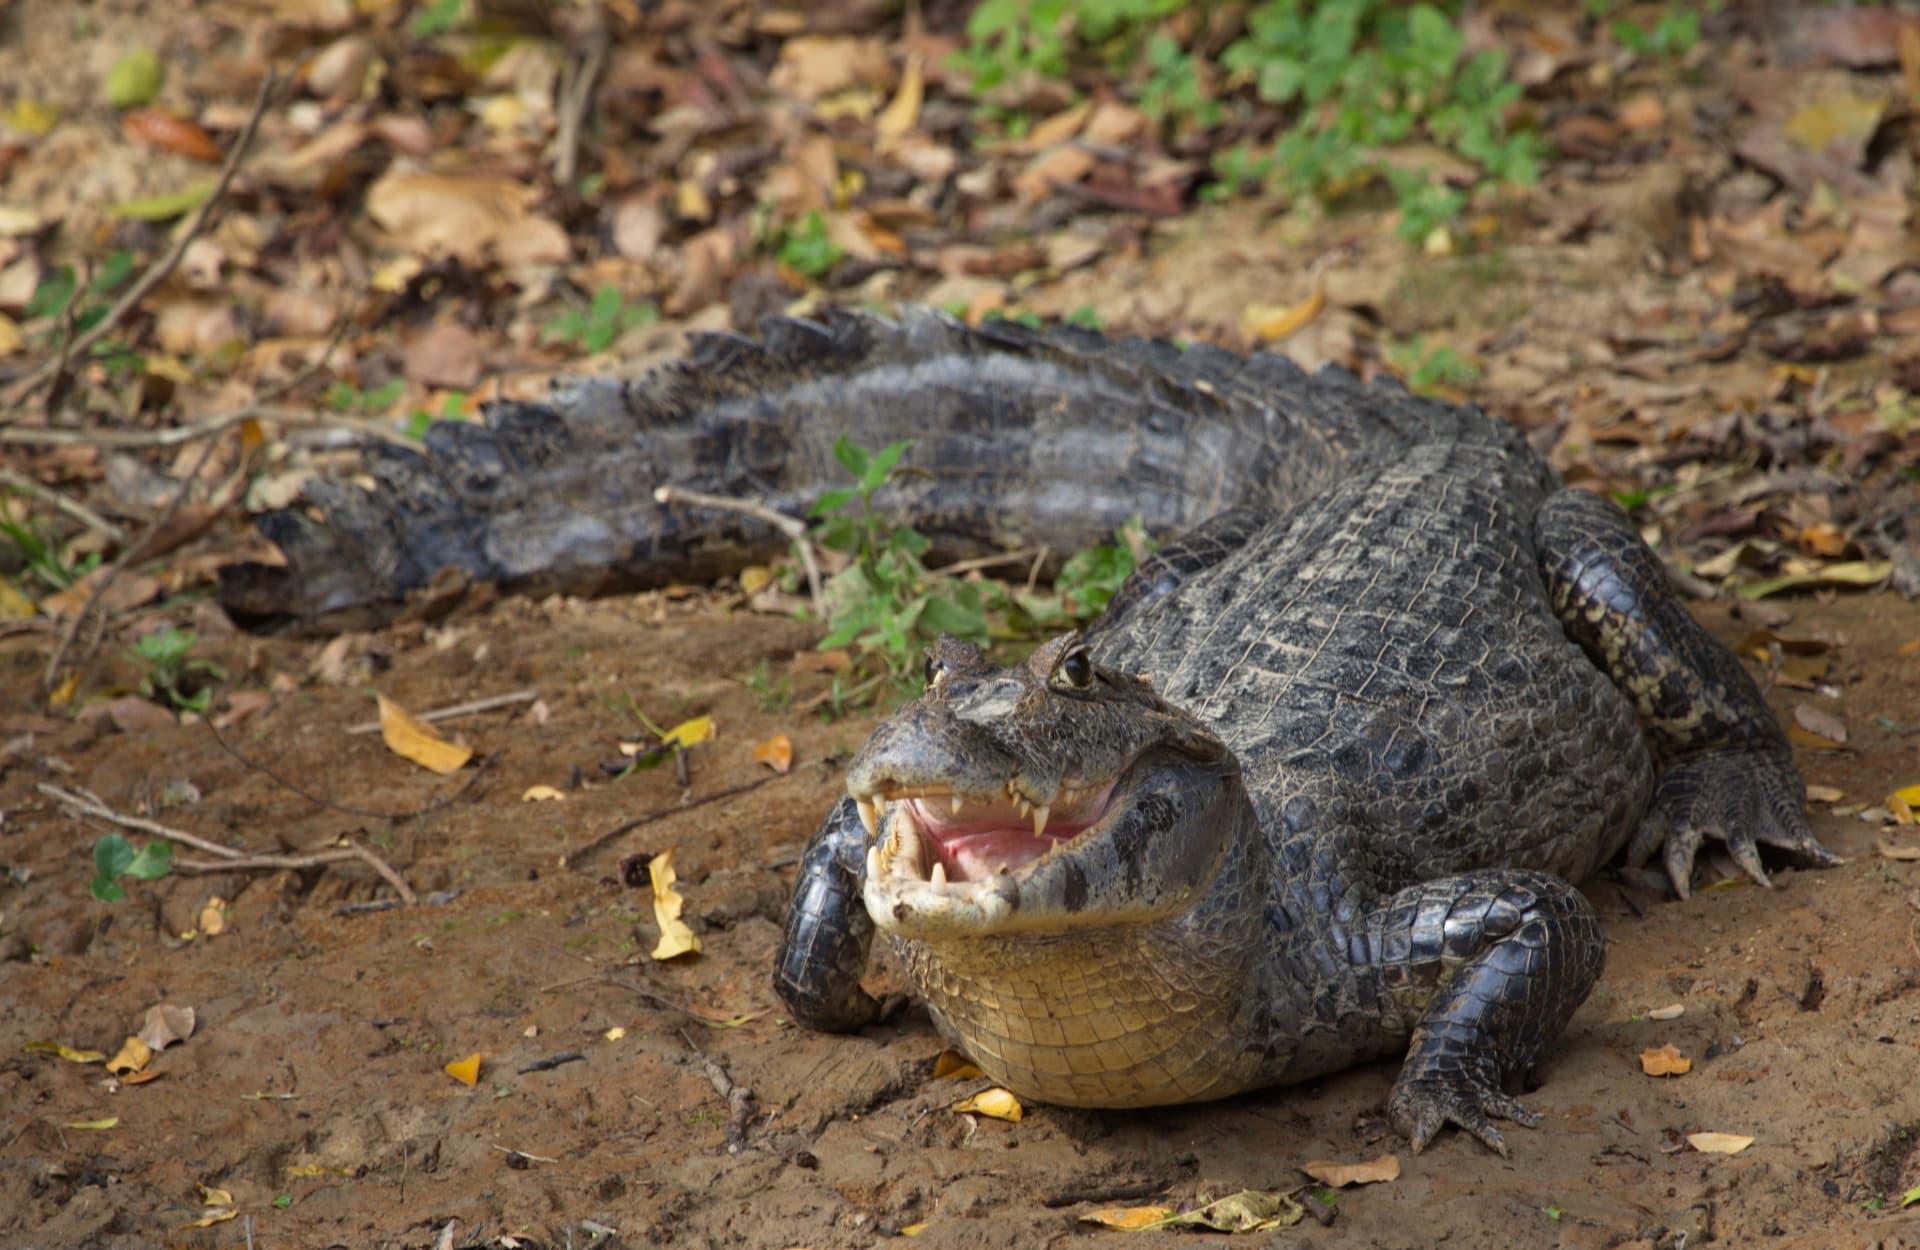 Learn about the Black Caiman in Peru.